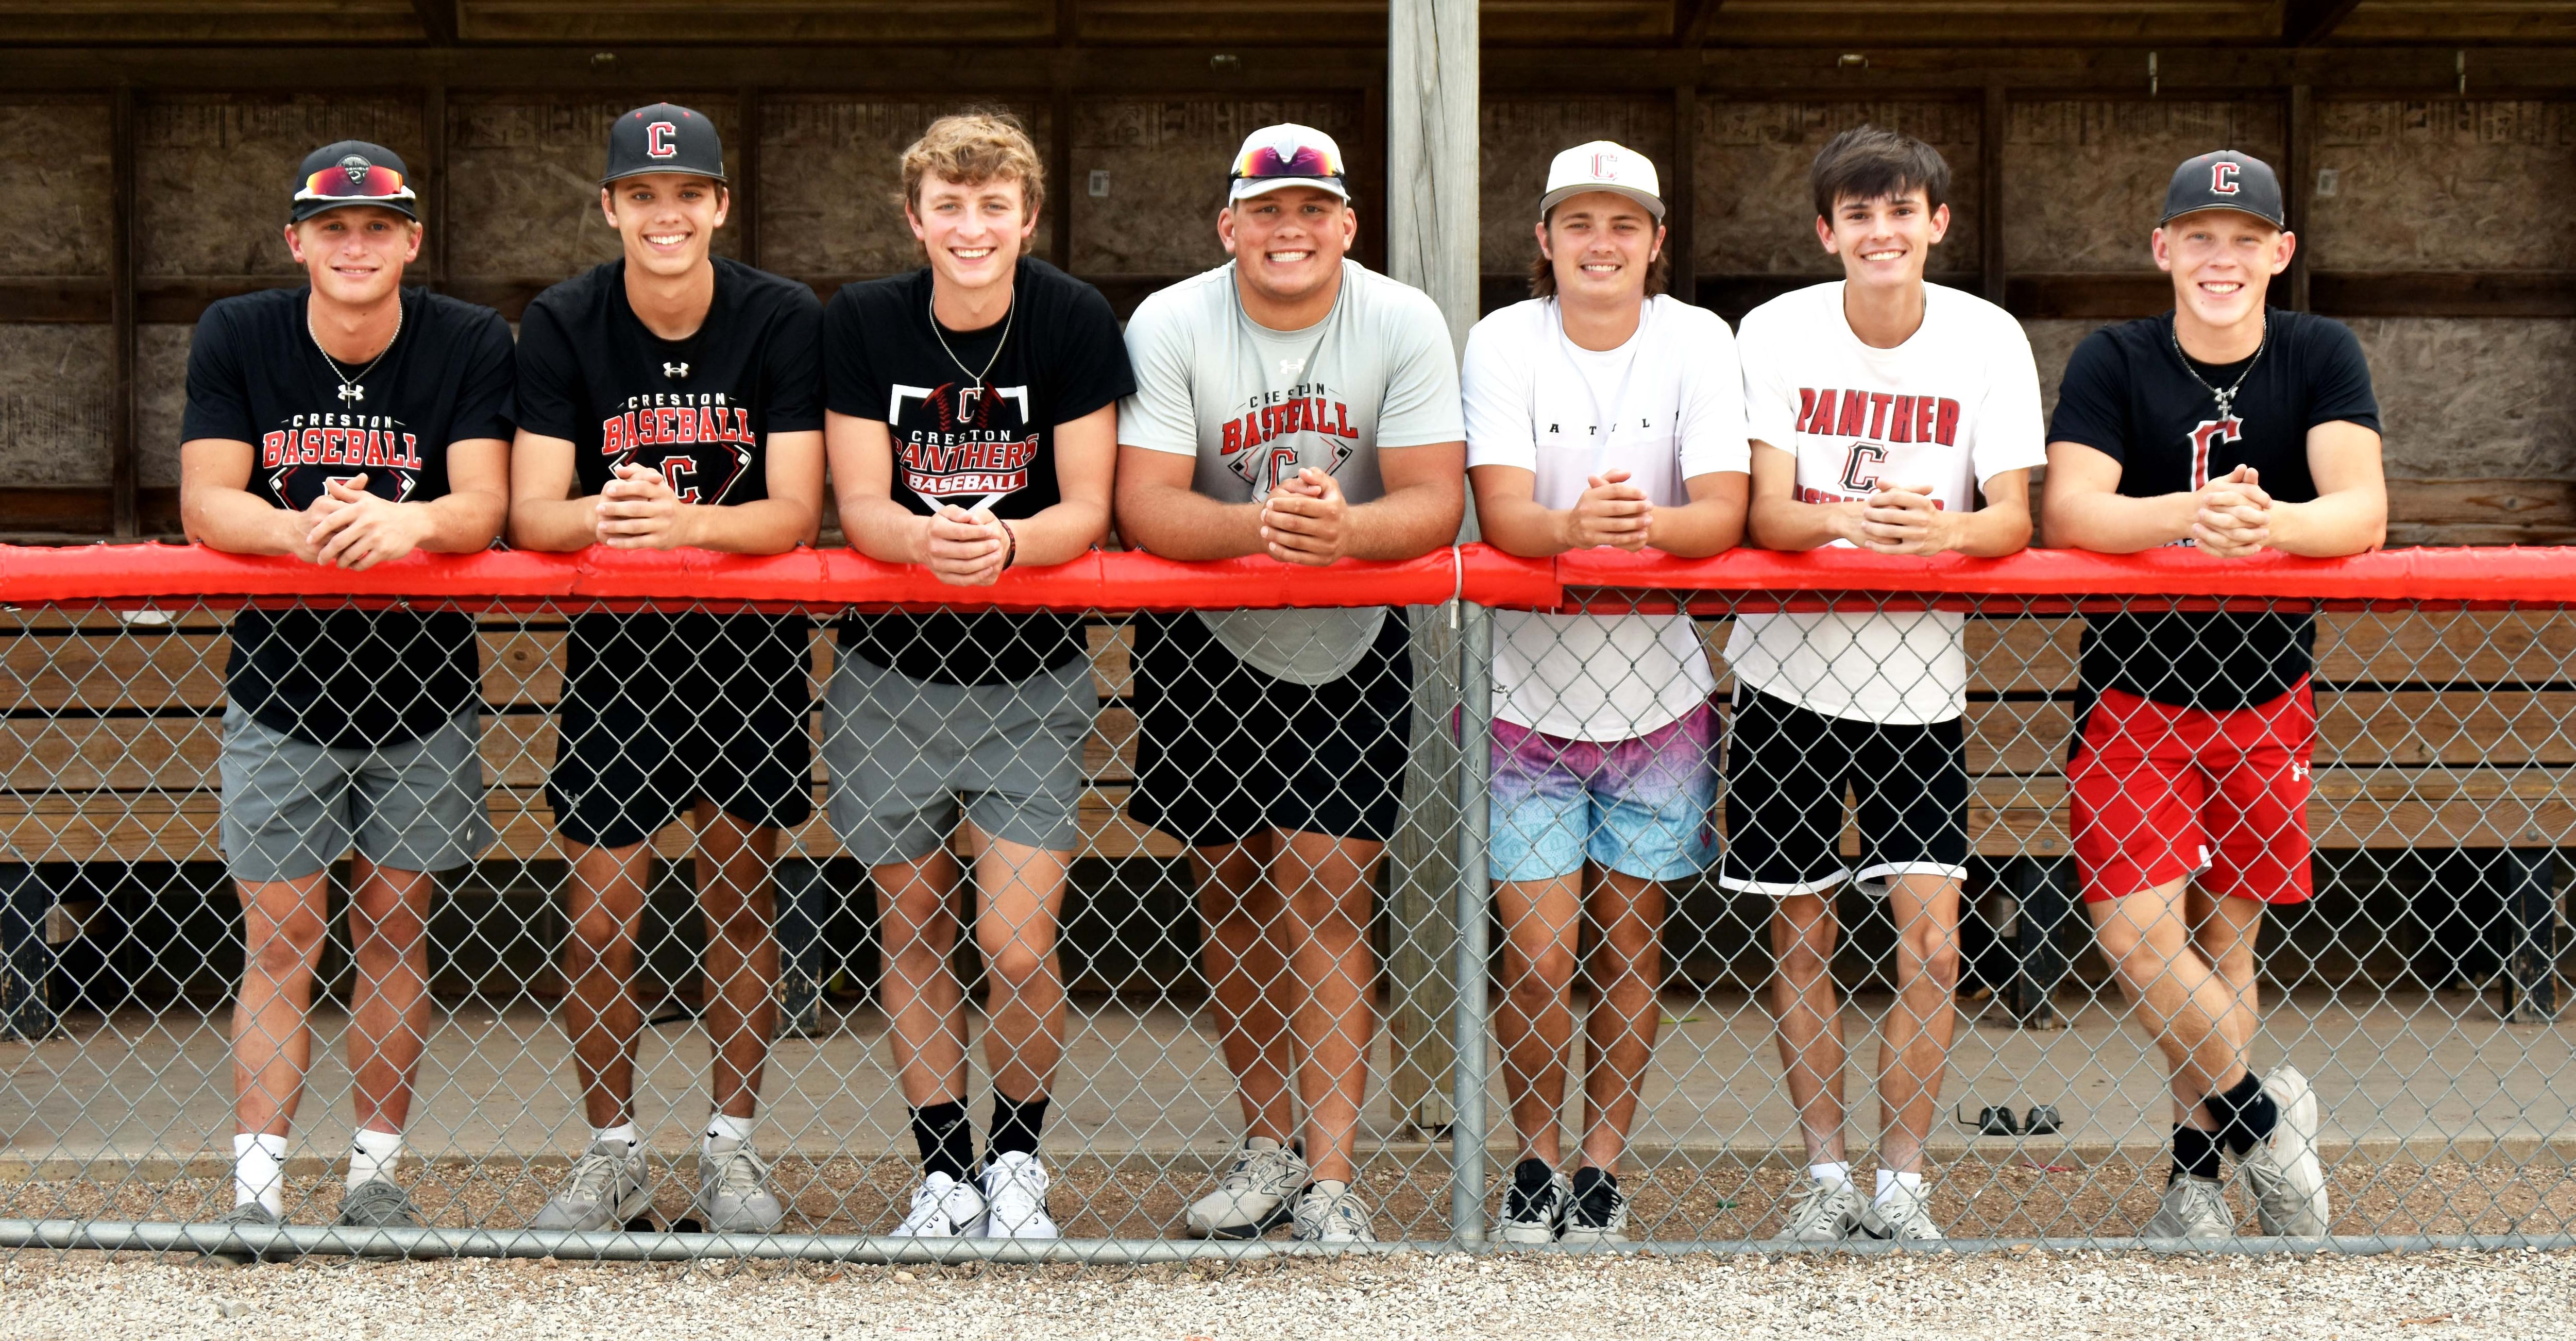 Panther baseball has ‘big shoes to fill’